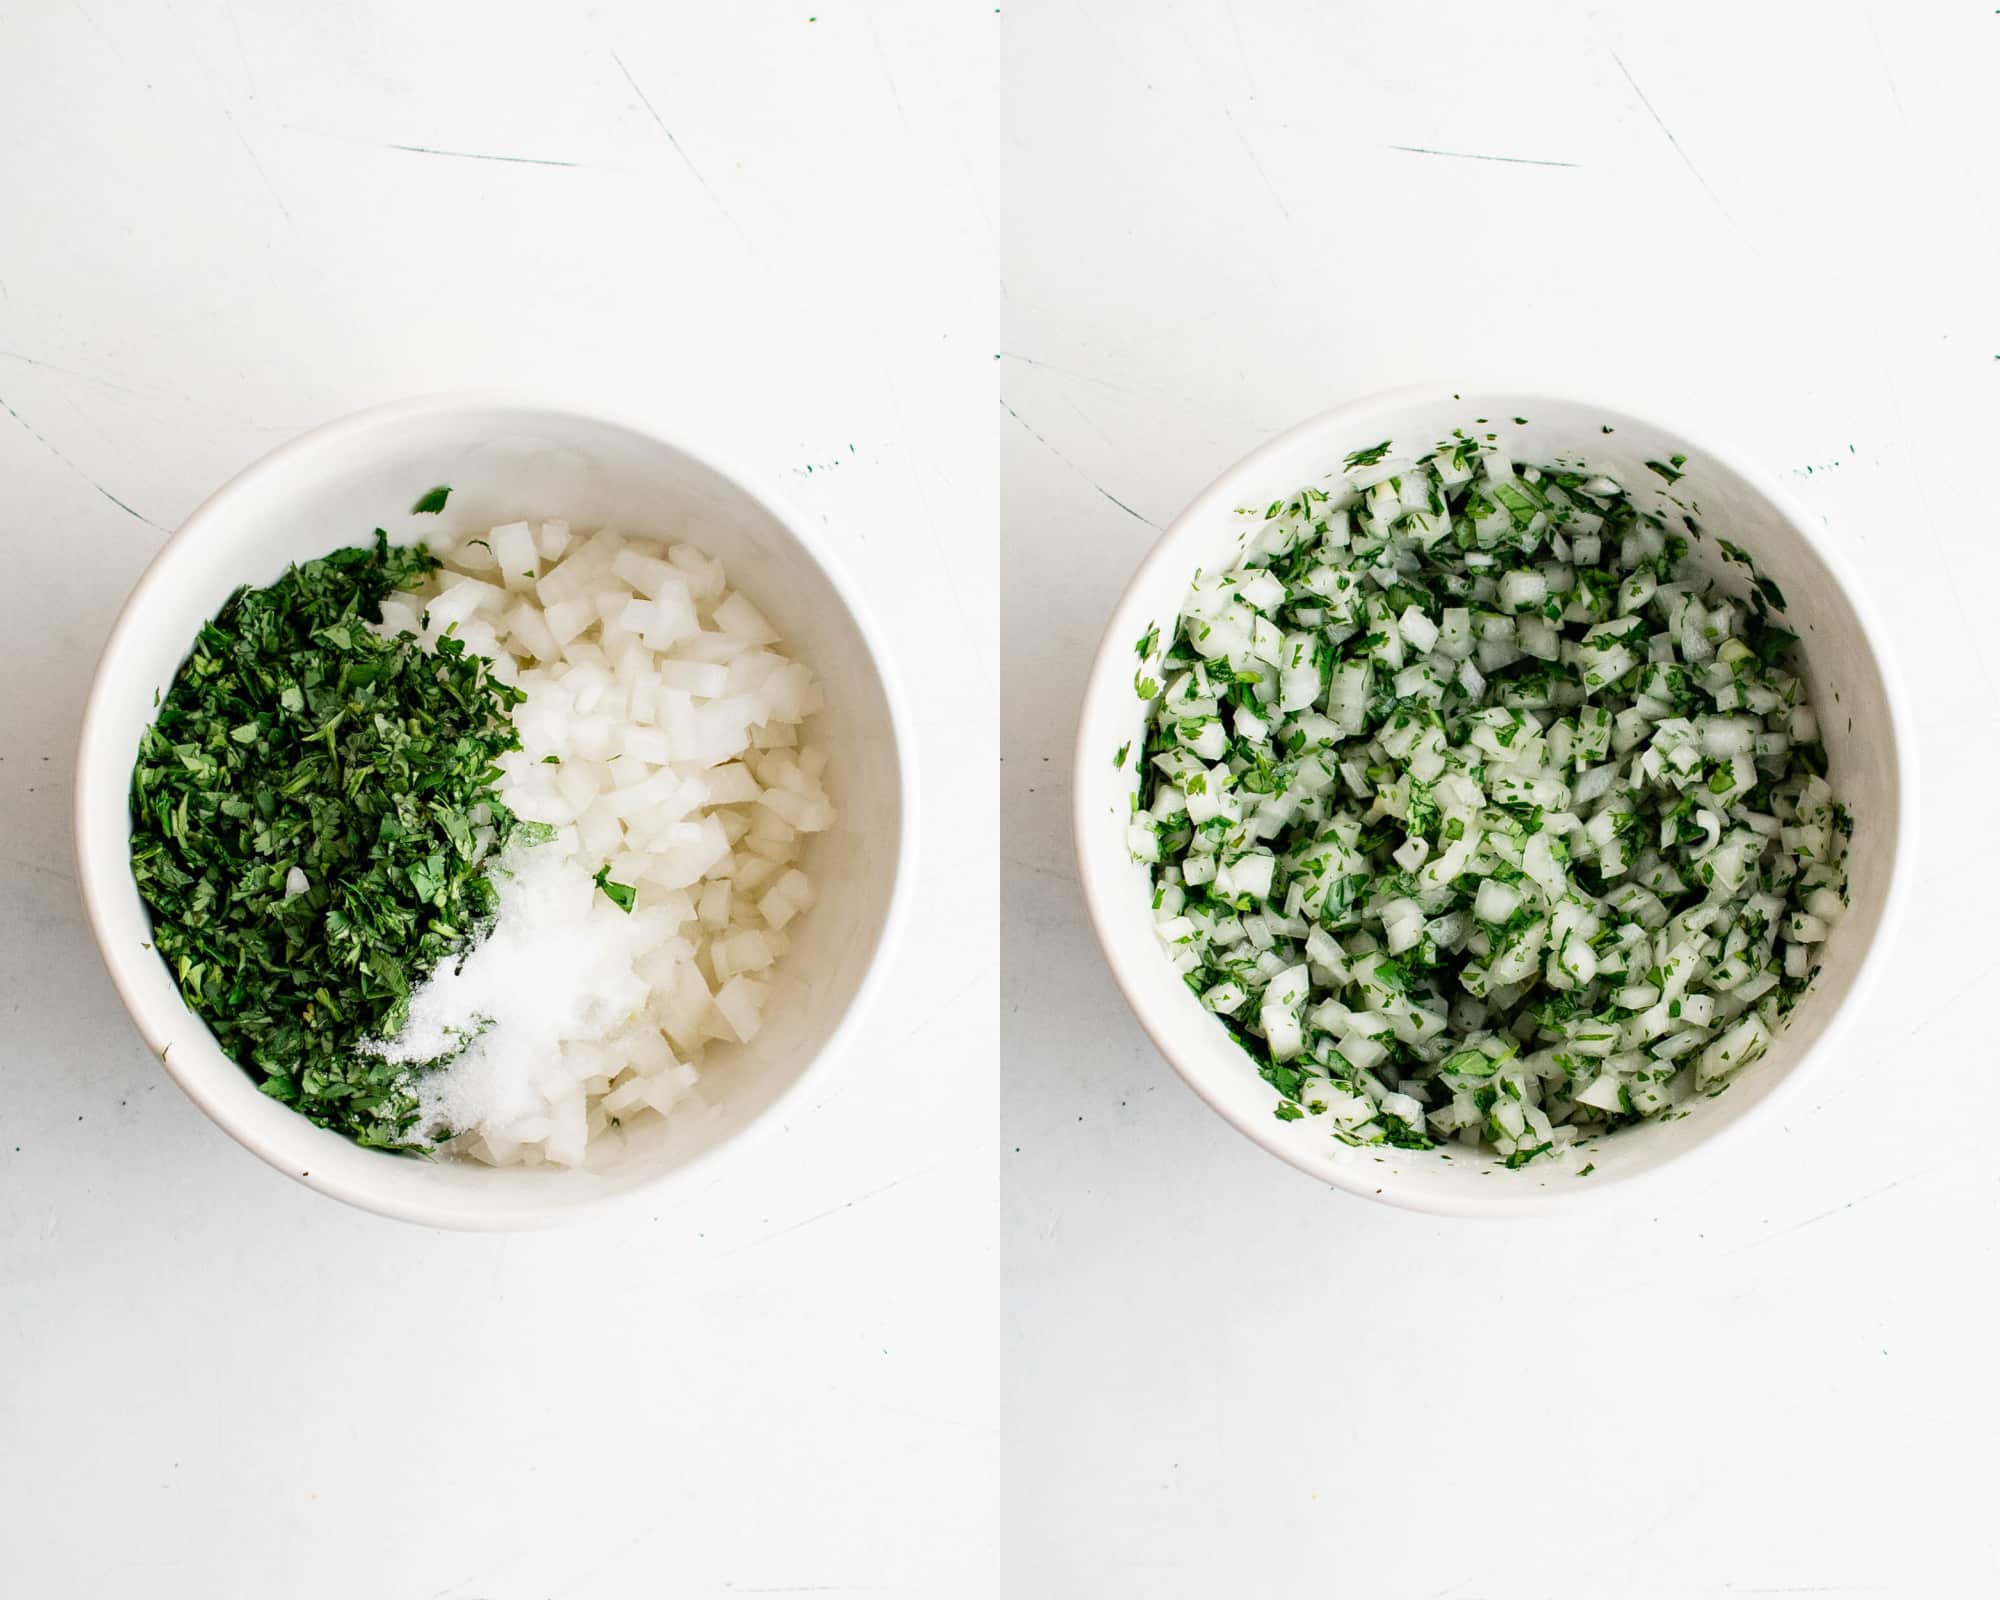 Two images; the first image shows a bowl filled with diced white onion, chopped cilantro, lime juice, and salt; image two shows white onions, cilantro, lime juice, and salt mixed together.